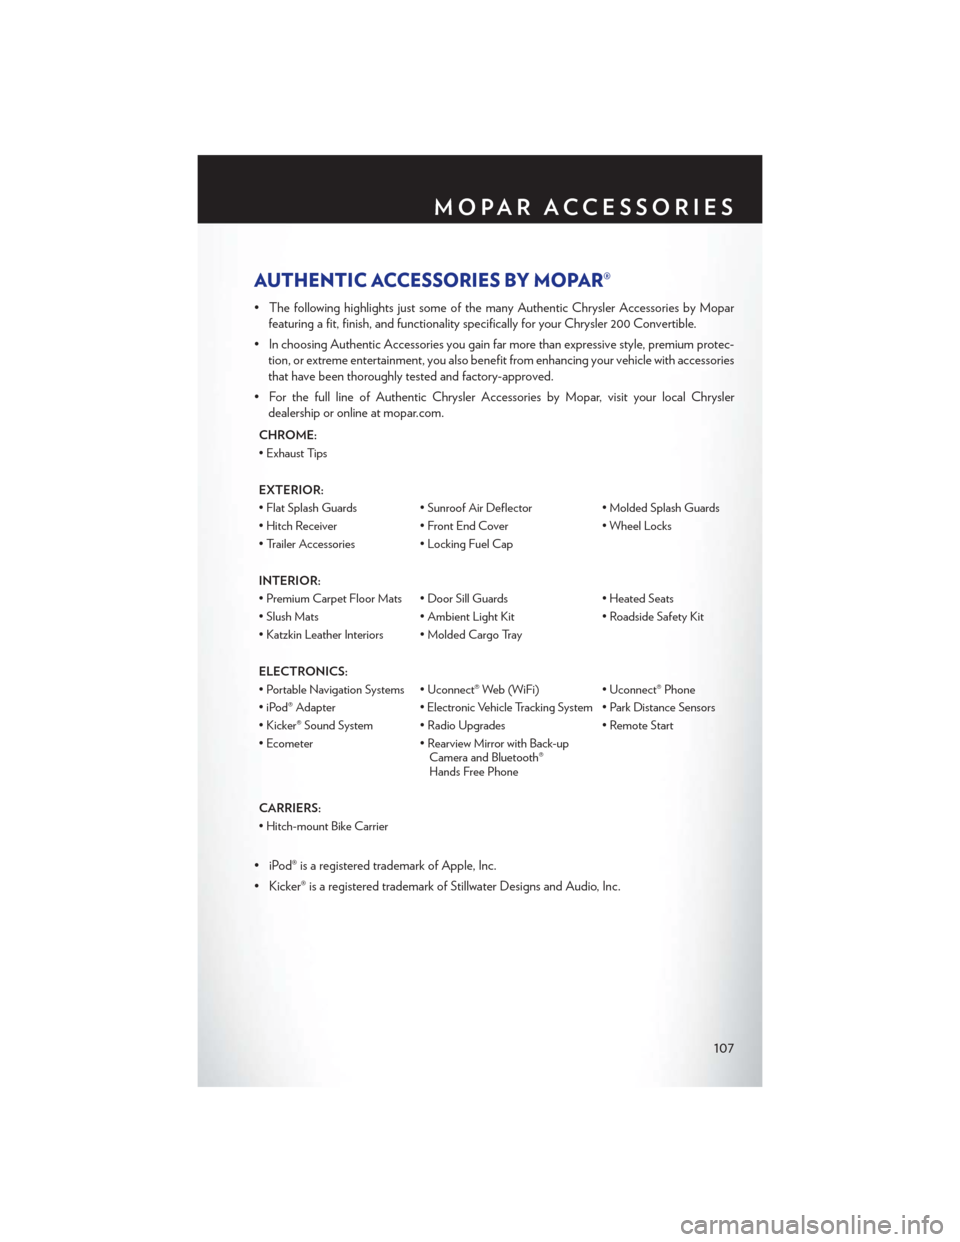 CHRYSLER 200 CONVERTIBLE 2013 1.G User Guide AUTHENTIC ACCESSORIES BY MOPAR®
• The following highlights just some of the many Authentic Chrysler Accessories by Moparfeaturing a fit, finish, and functionality specifically for your Chrysler 200